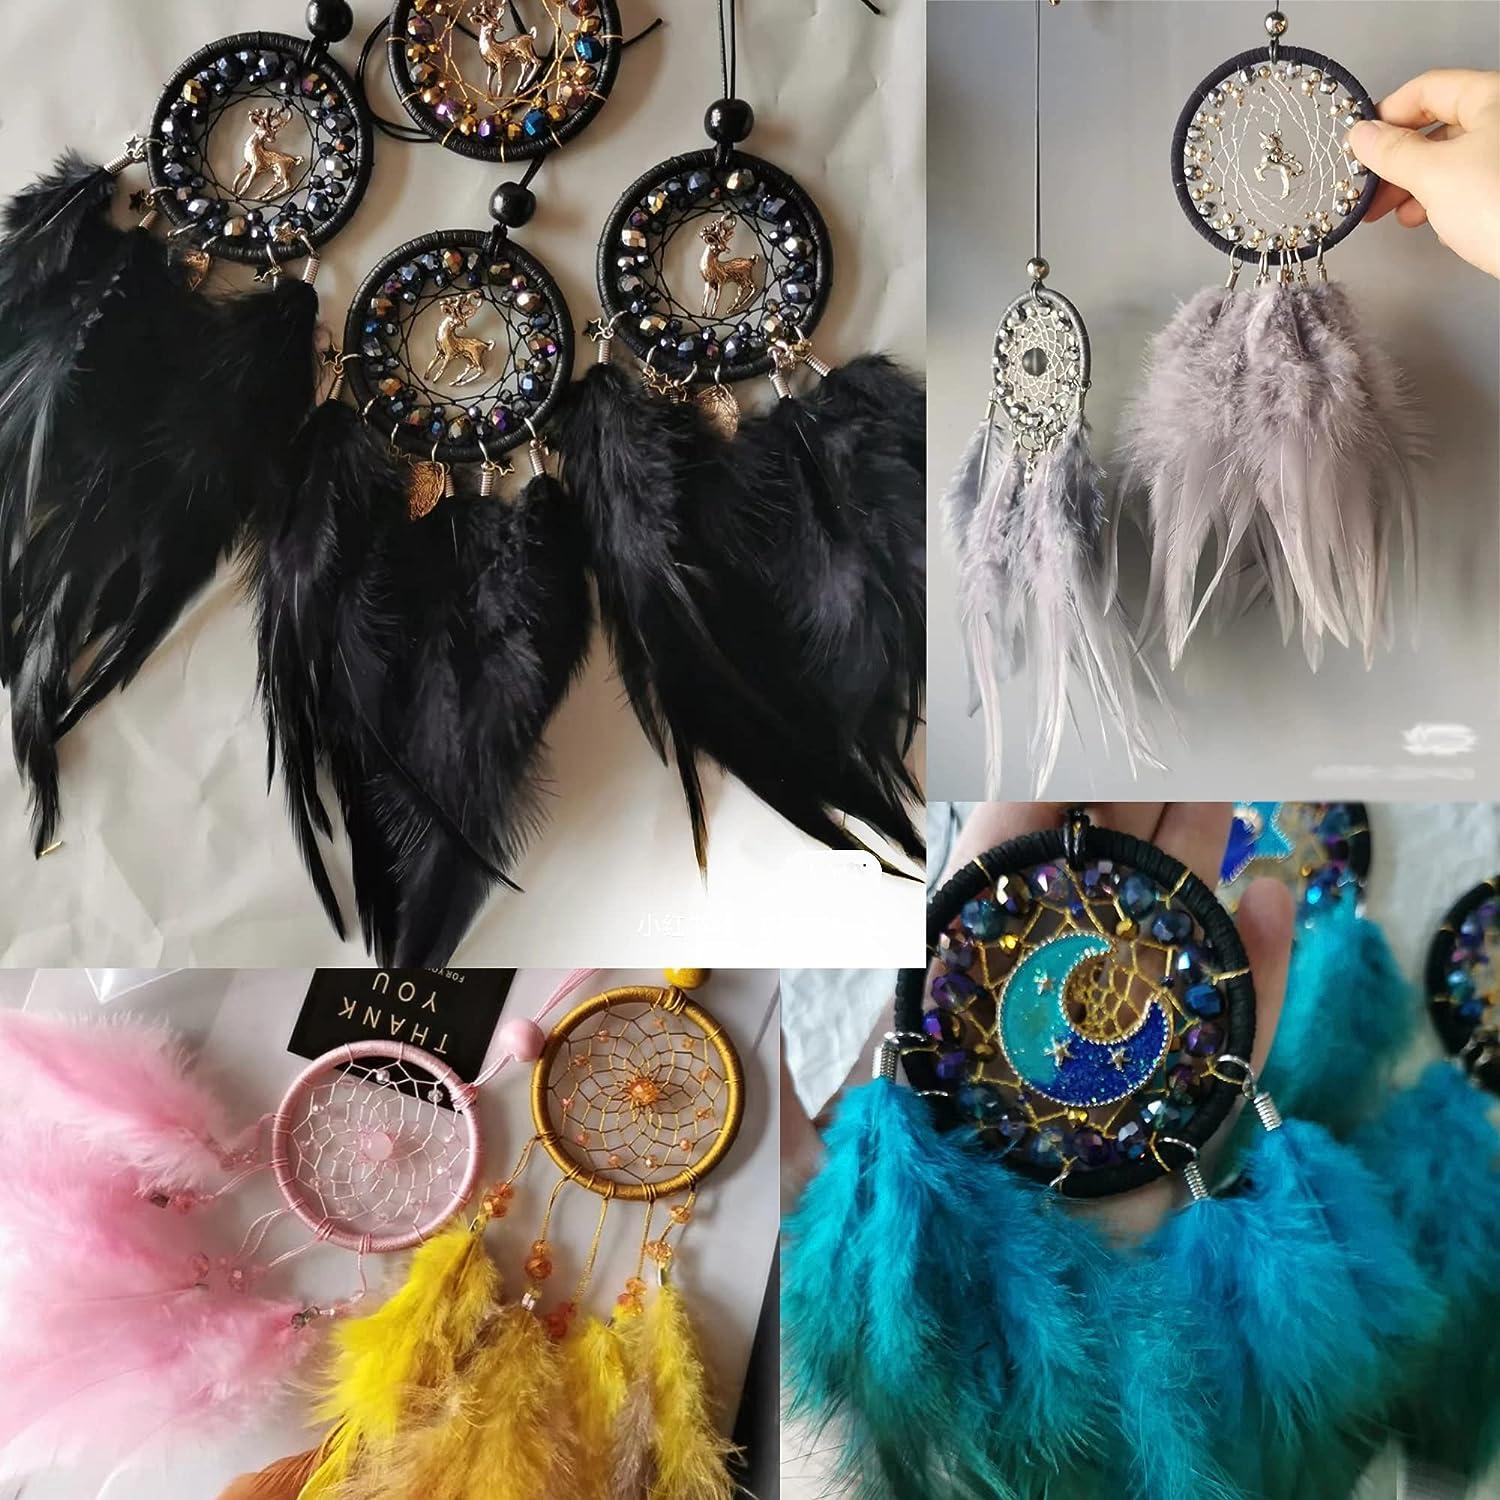 Colorful Feathers DIY Crafting Craft Rainbow Feather for Dream Catcher  Party Decorations,Feather Mask,Jewelry Making(100pcs)